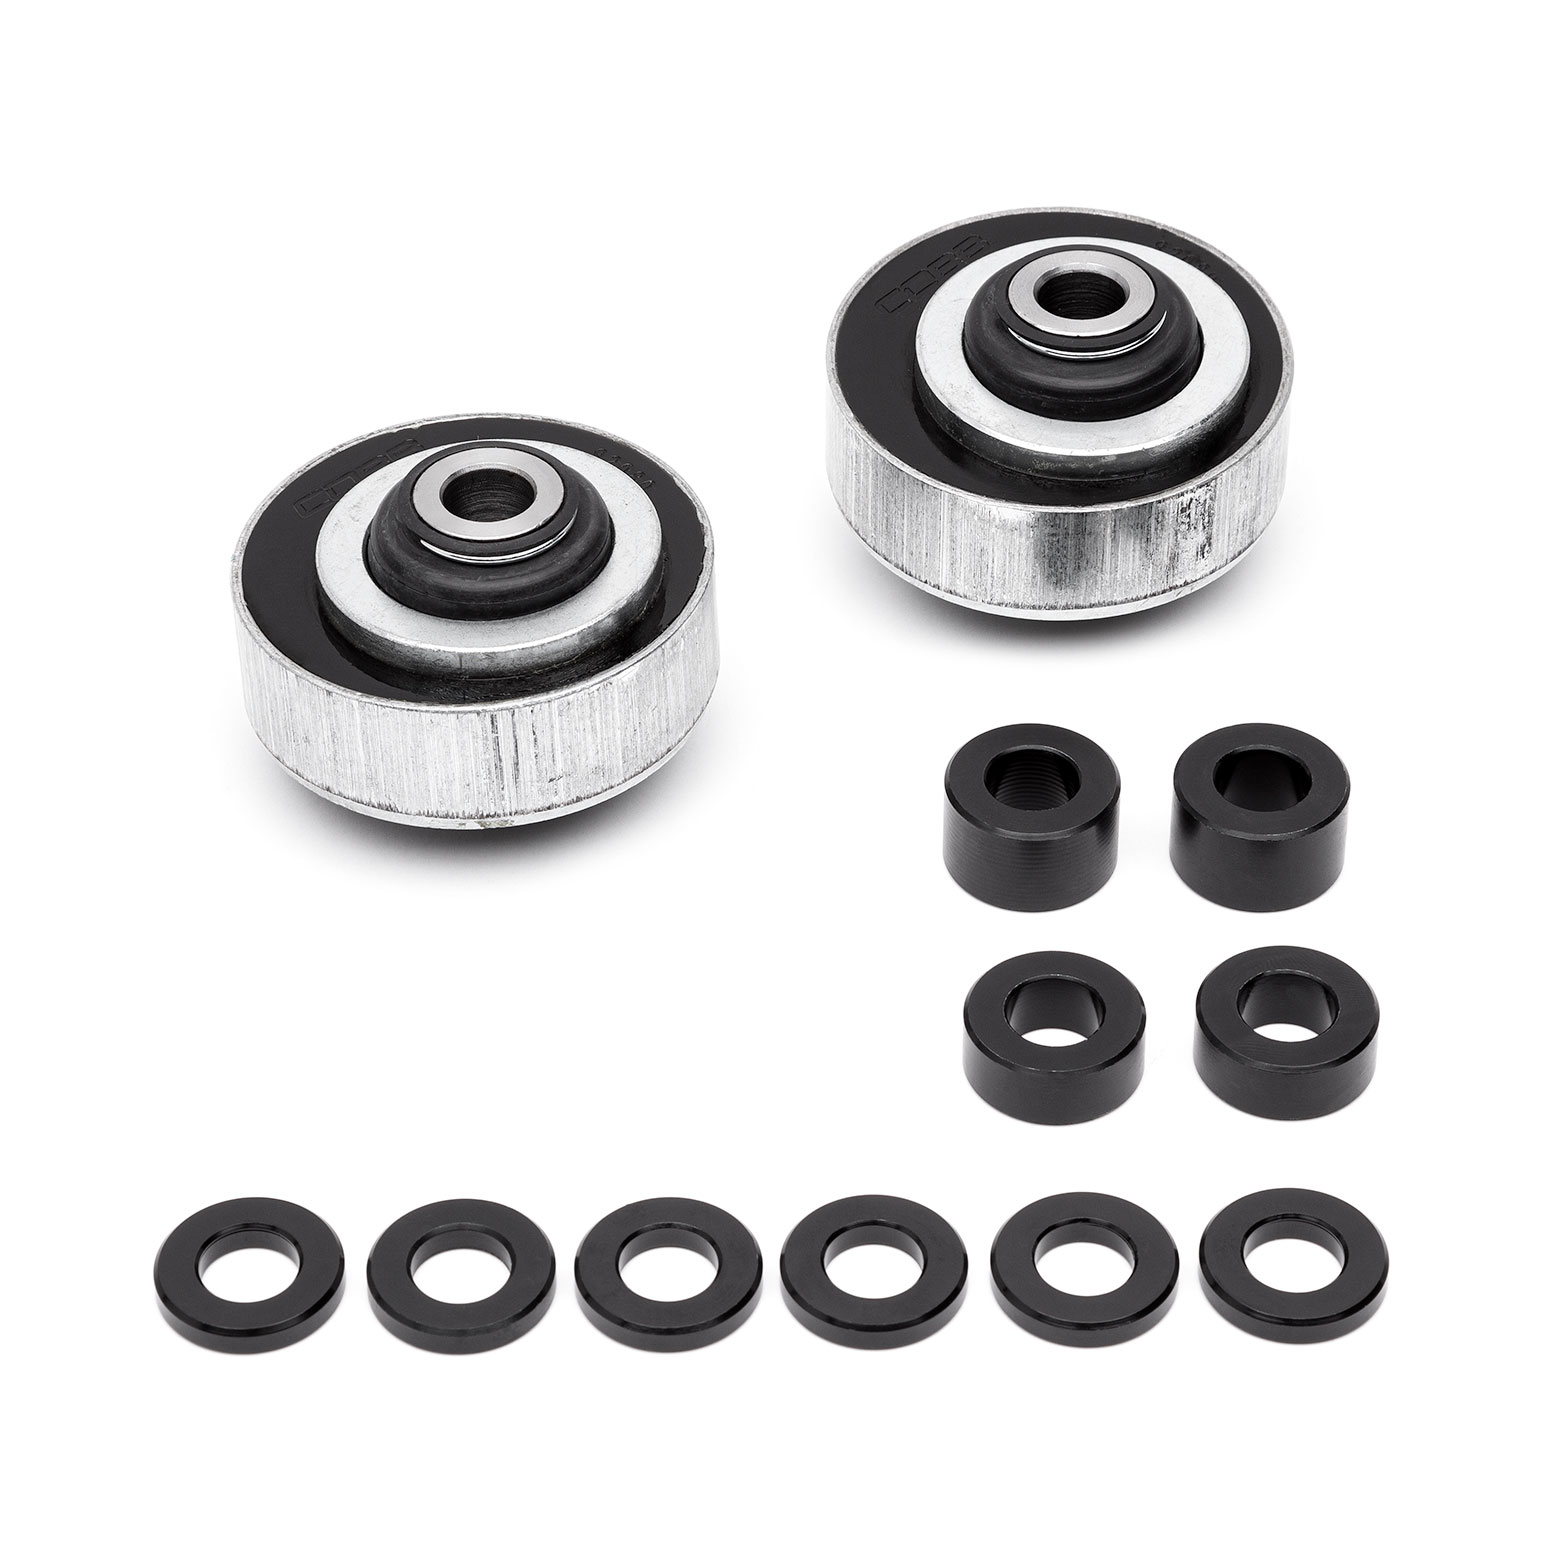 COBB Tuning Front Control Arm Innner Bushing Kit w/ Offset Alignment